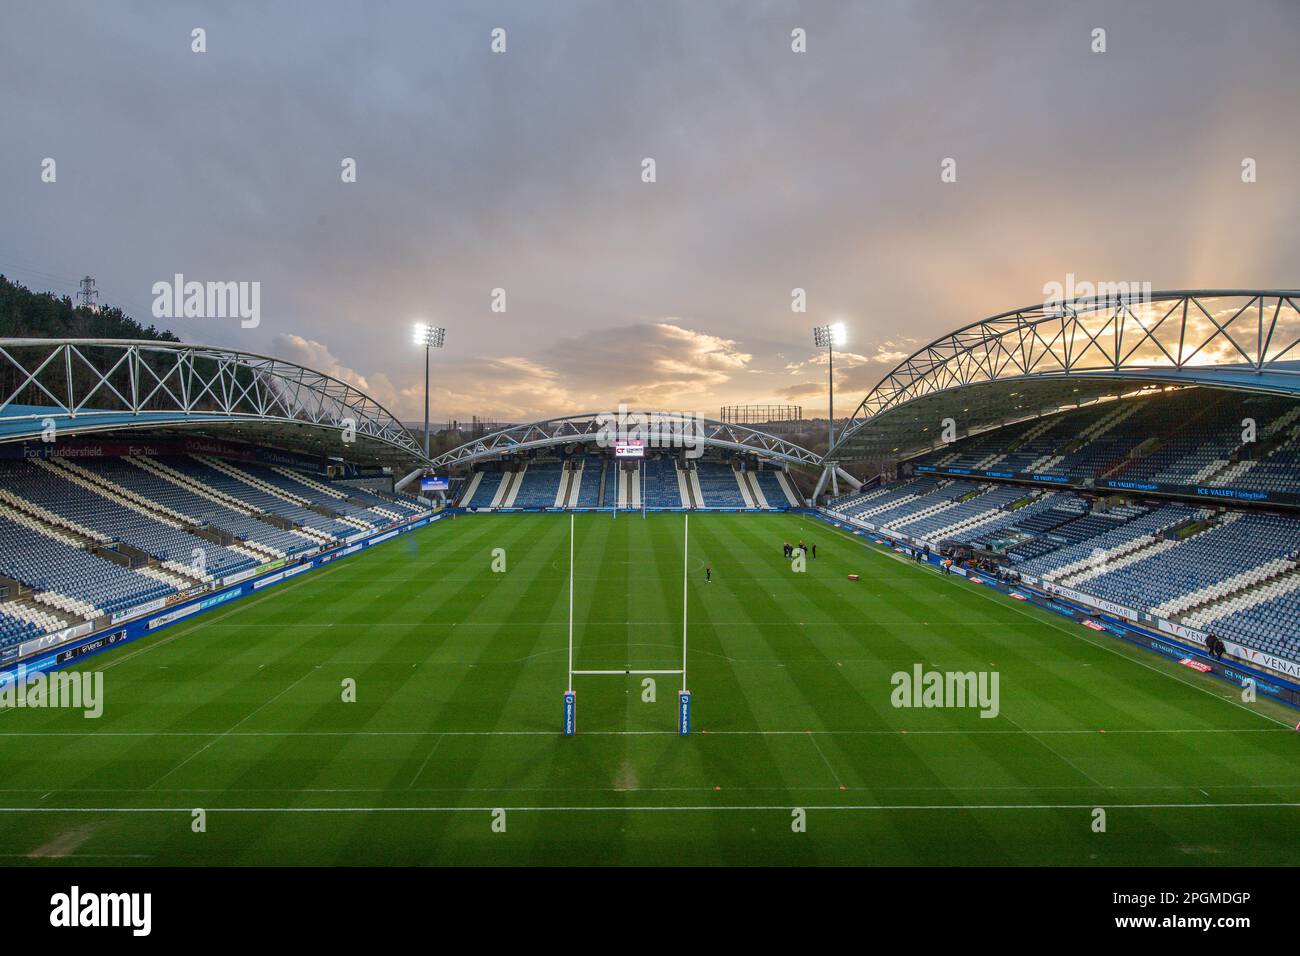 General view of The John Smith's Stadium, Home of Huddersfield Giants ahead of the Betfred Super League Round 6 match Huddersfield Giants vs St Helens at John Smith's Stadium, Huddersfield, United Kingdom, 23rd March 2023  (Photo by Craig Thomas/News Images) Stock Photo